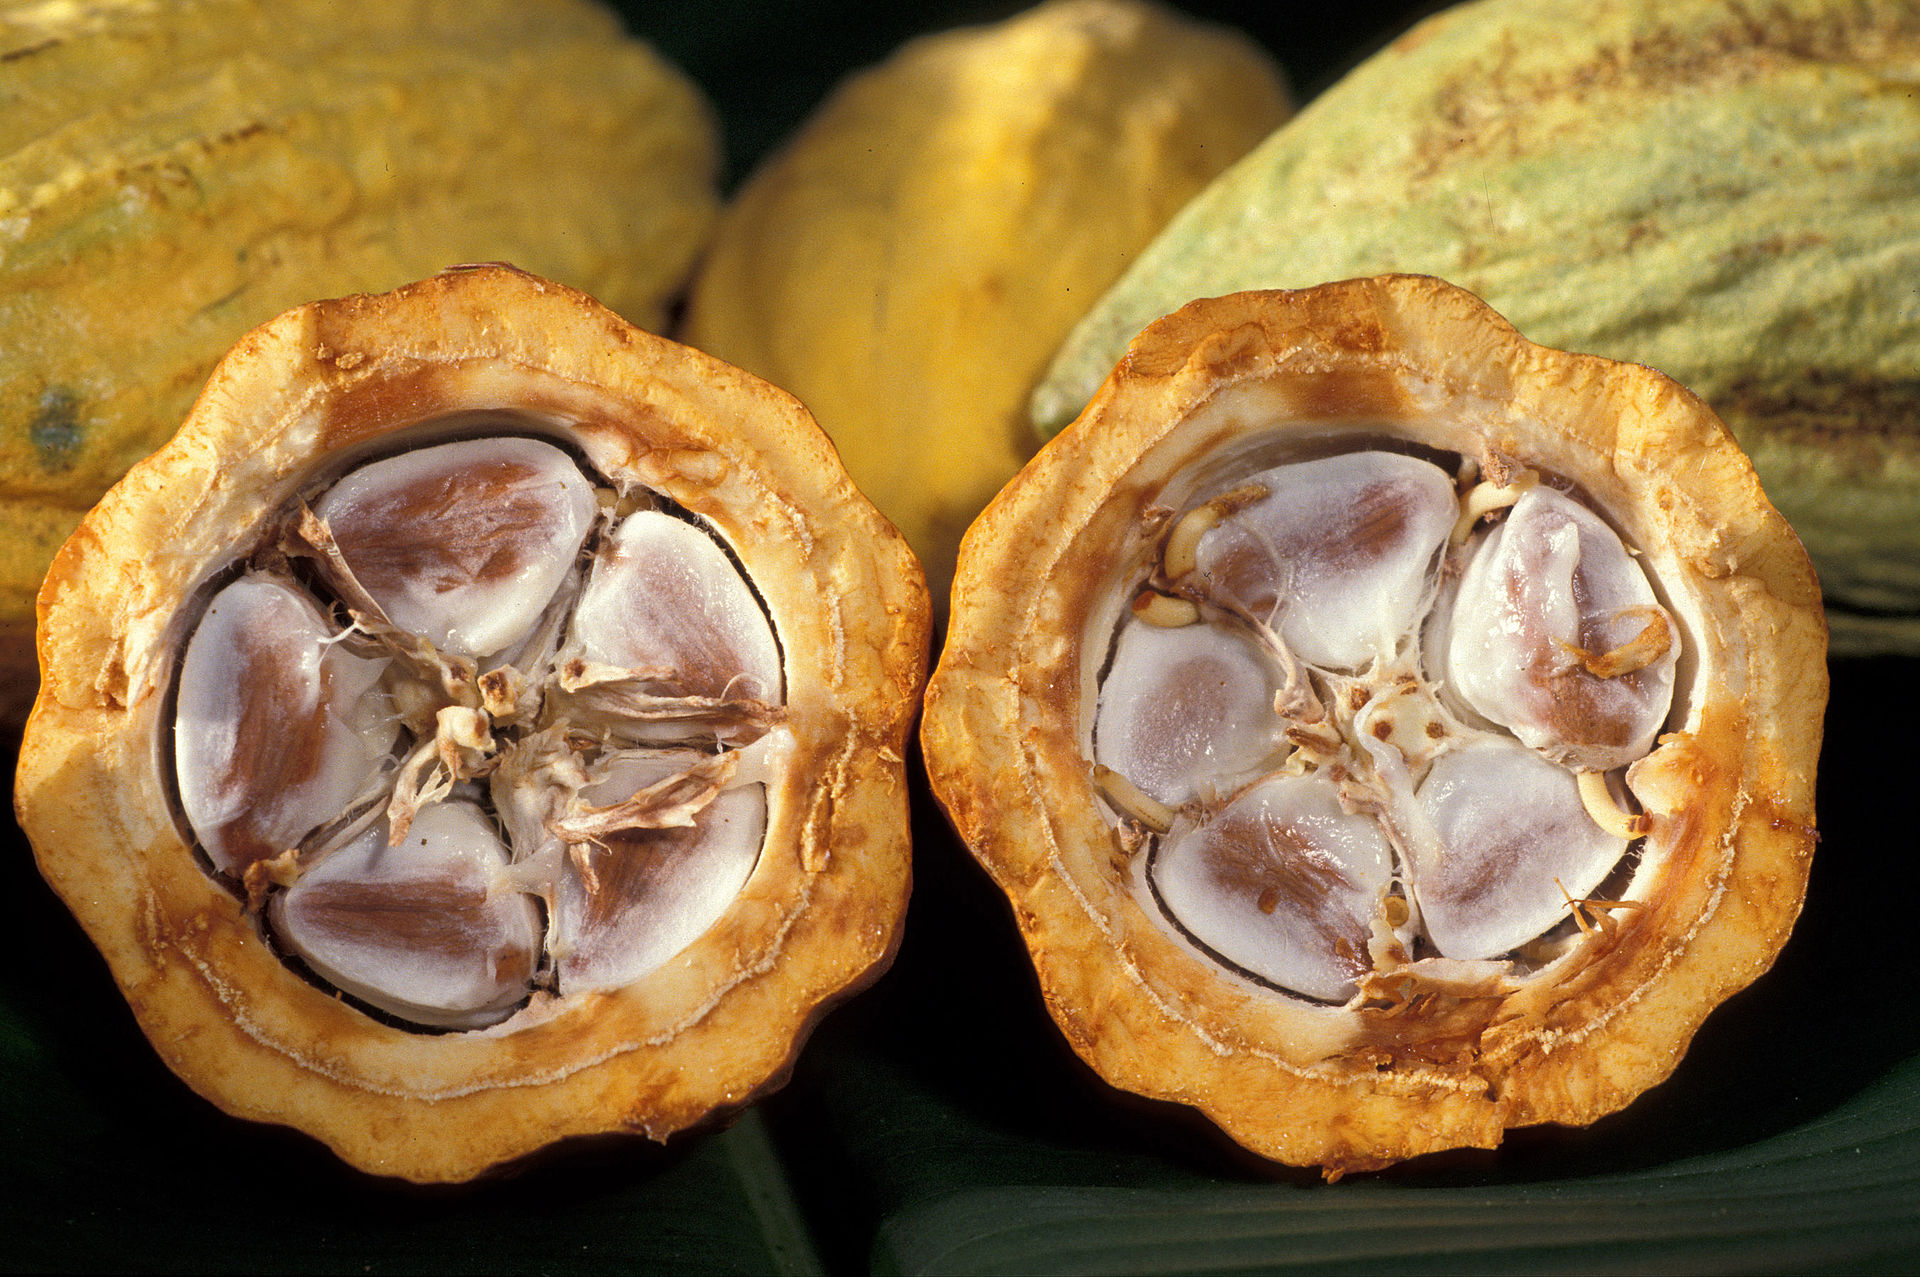 The inside of a cacao pod